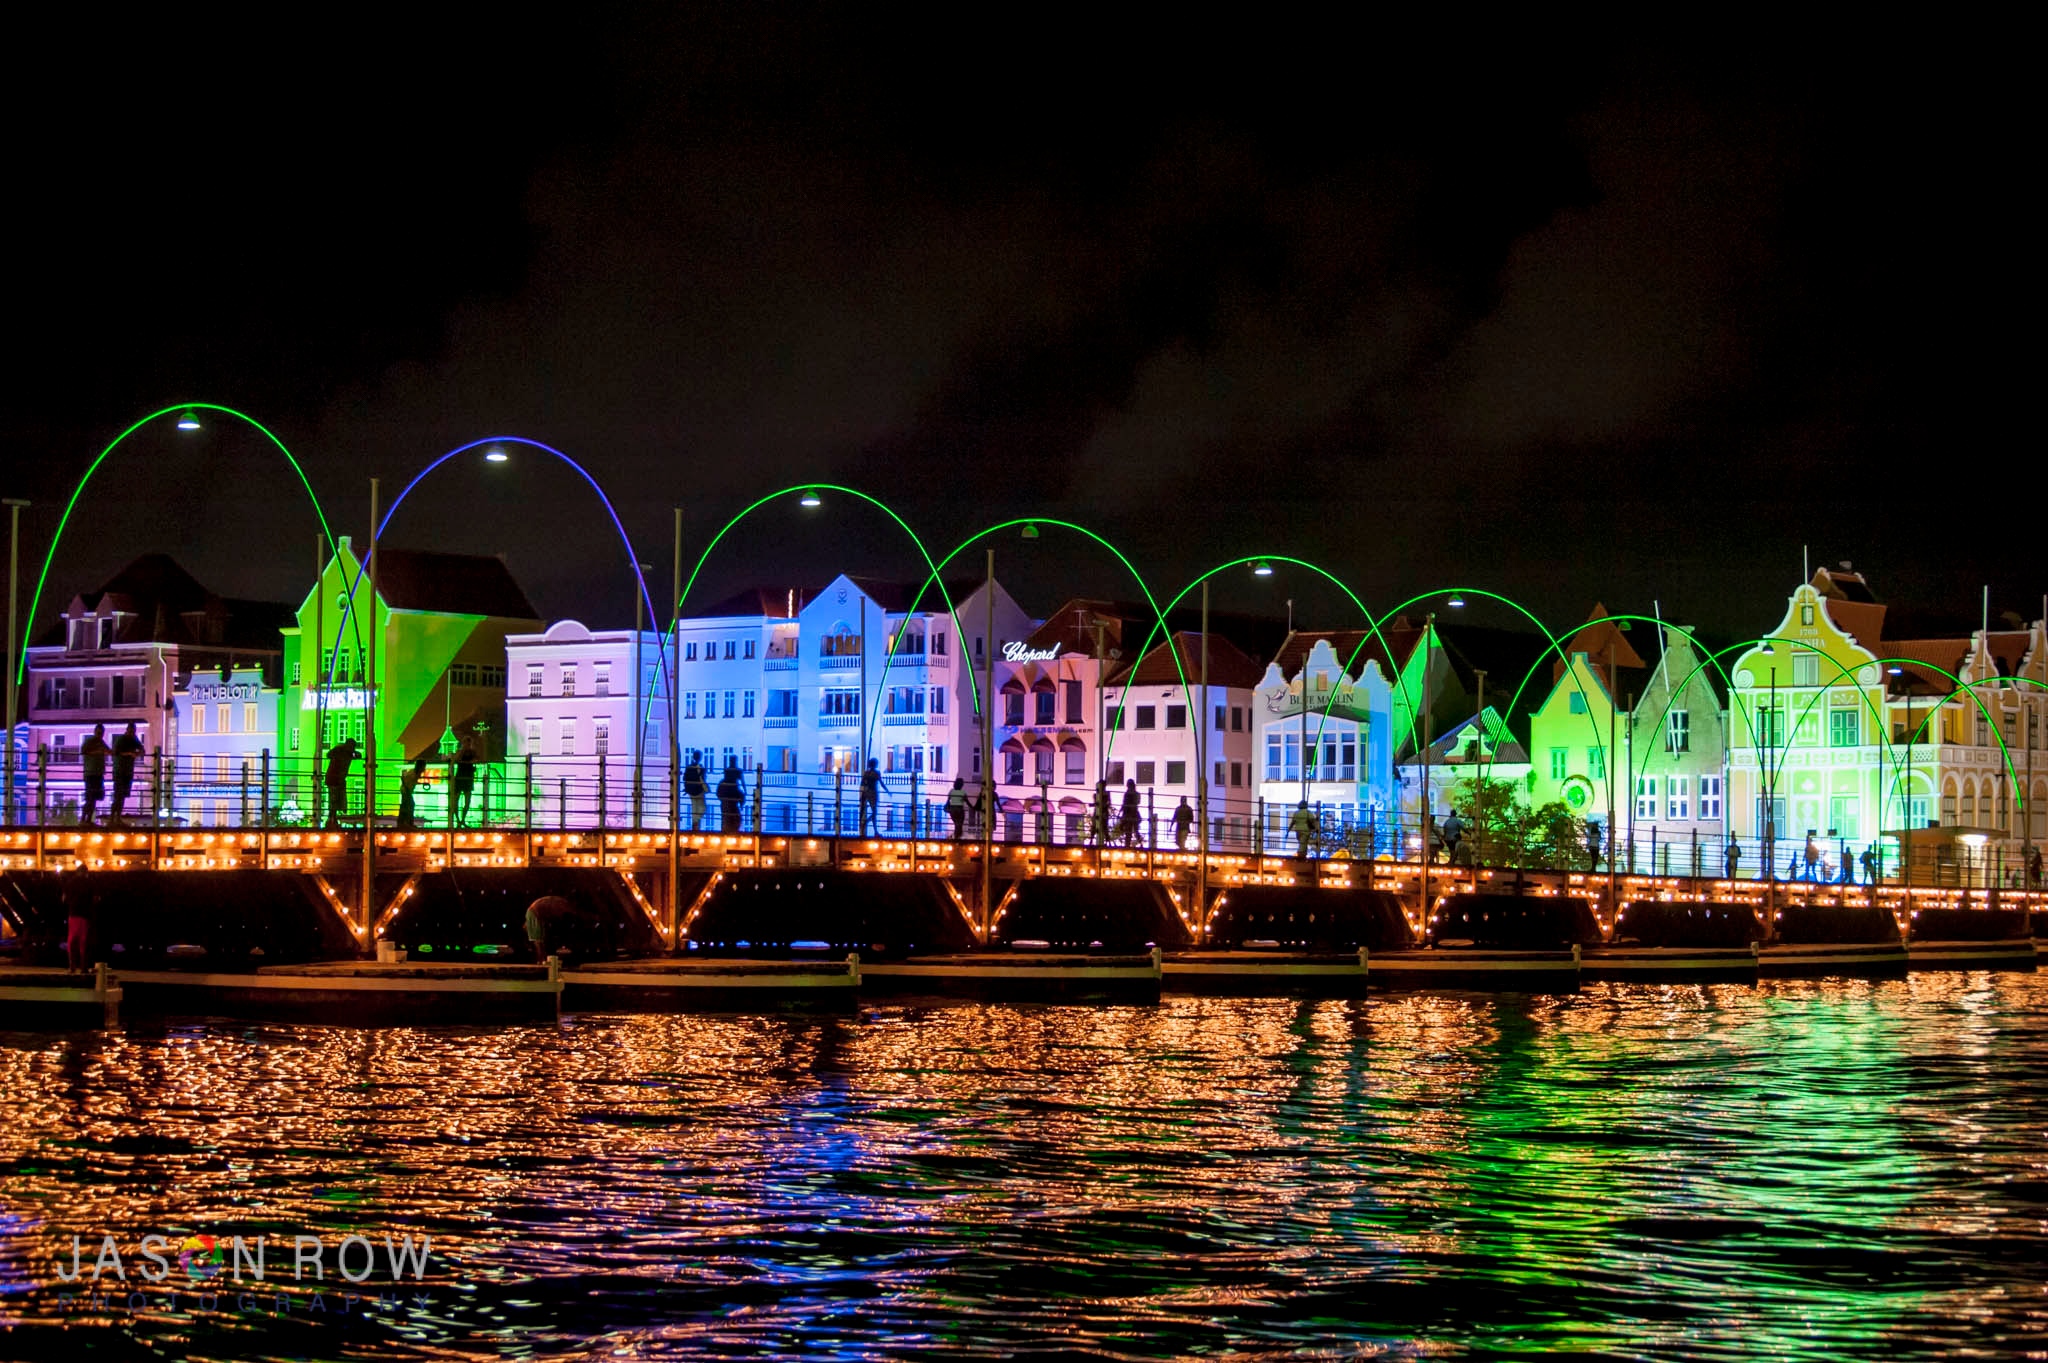 Without a tripod I had to use high ISO for this night shot of Curacao. By Jason Row Photography